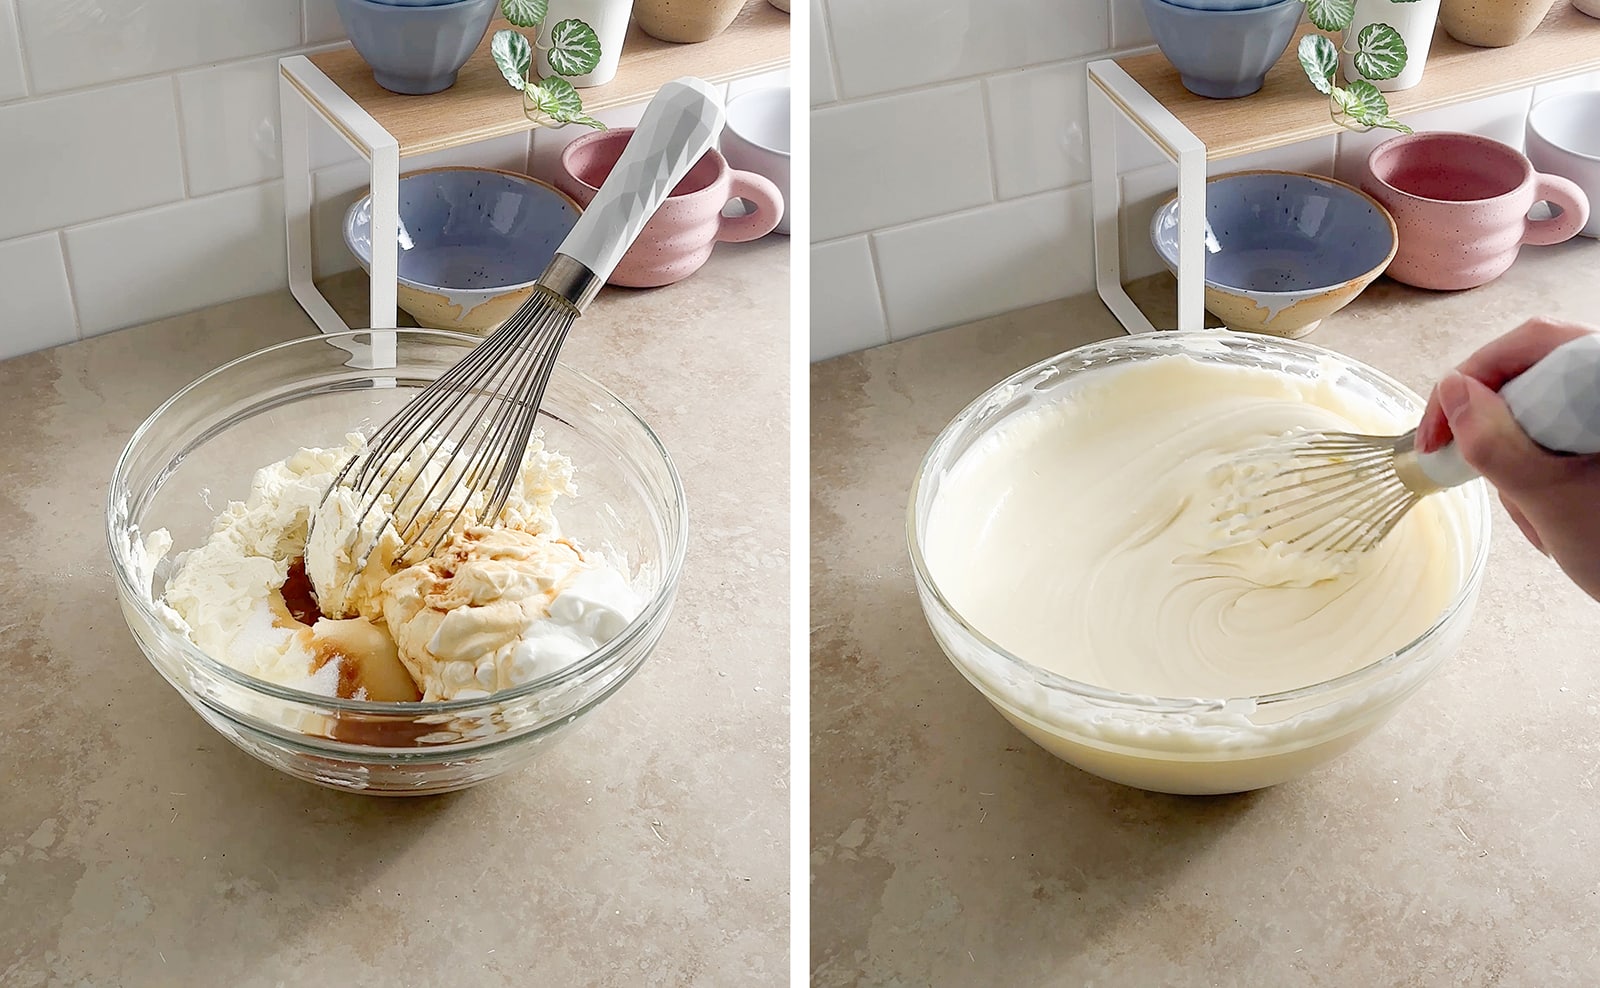 Left to right: whisk in a bowl of ingredients, whisking cream cheese batter in a bowl.